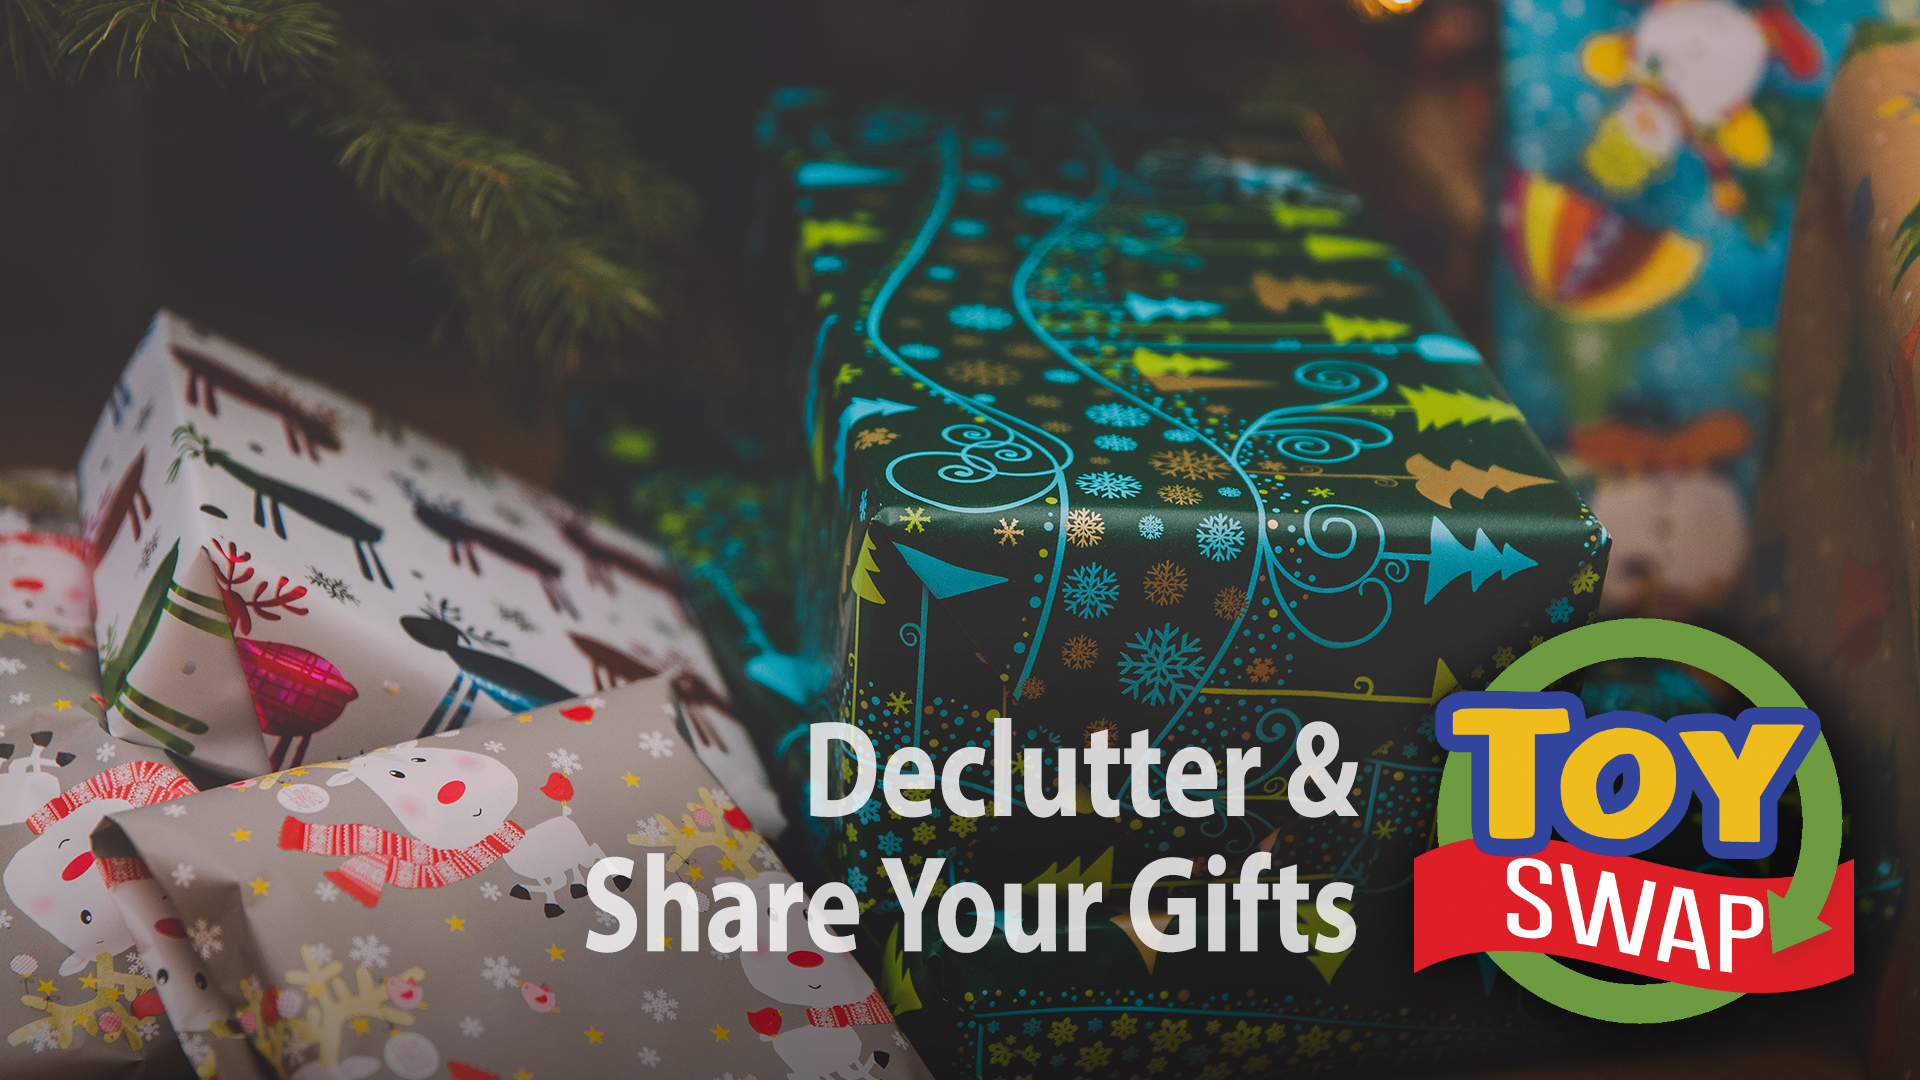 Declutter & Share Your Gifts